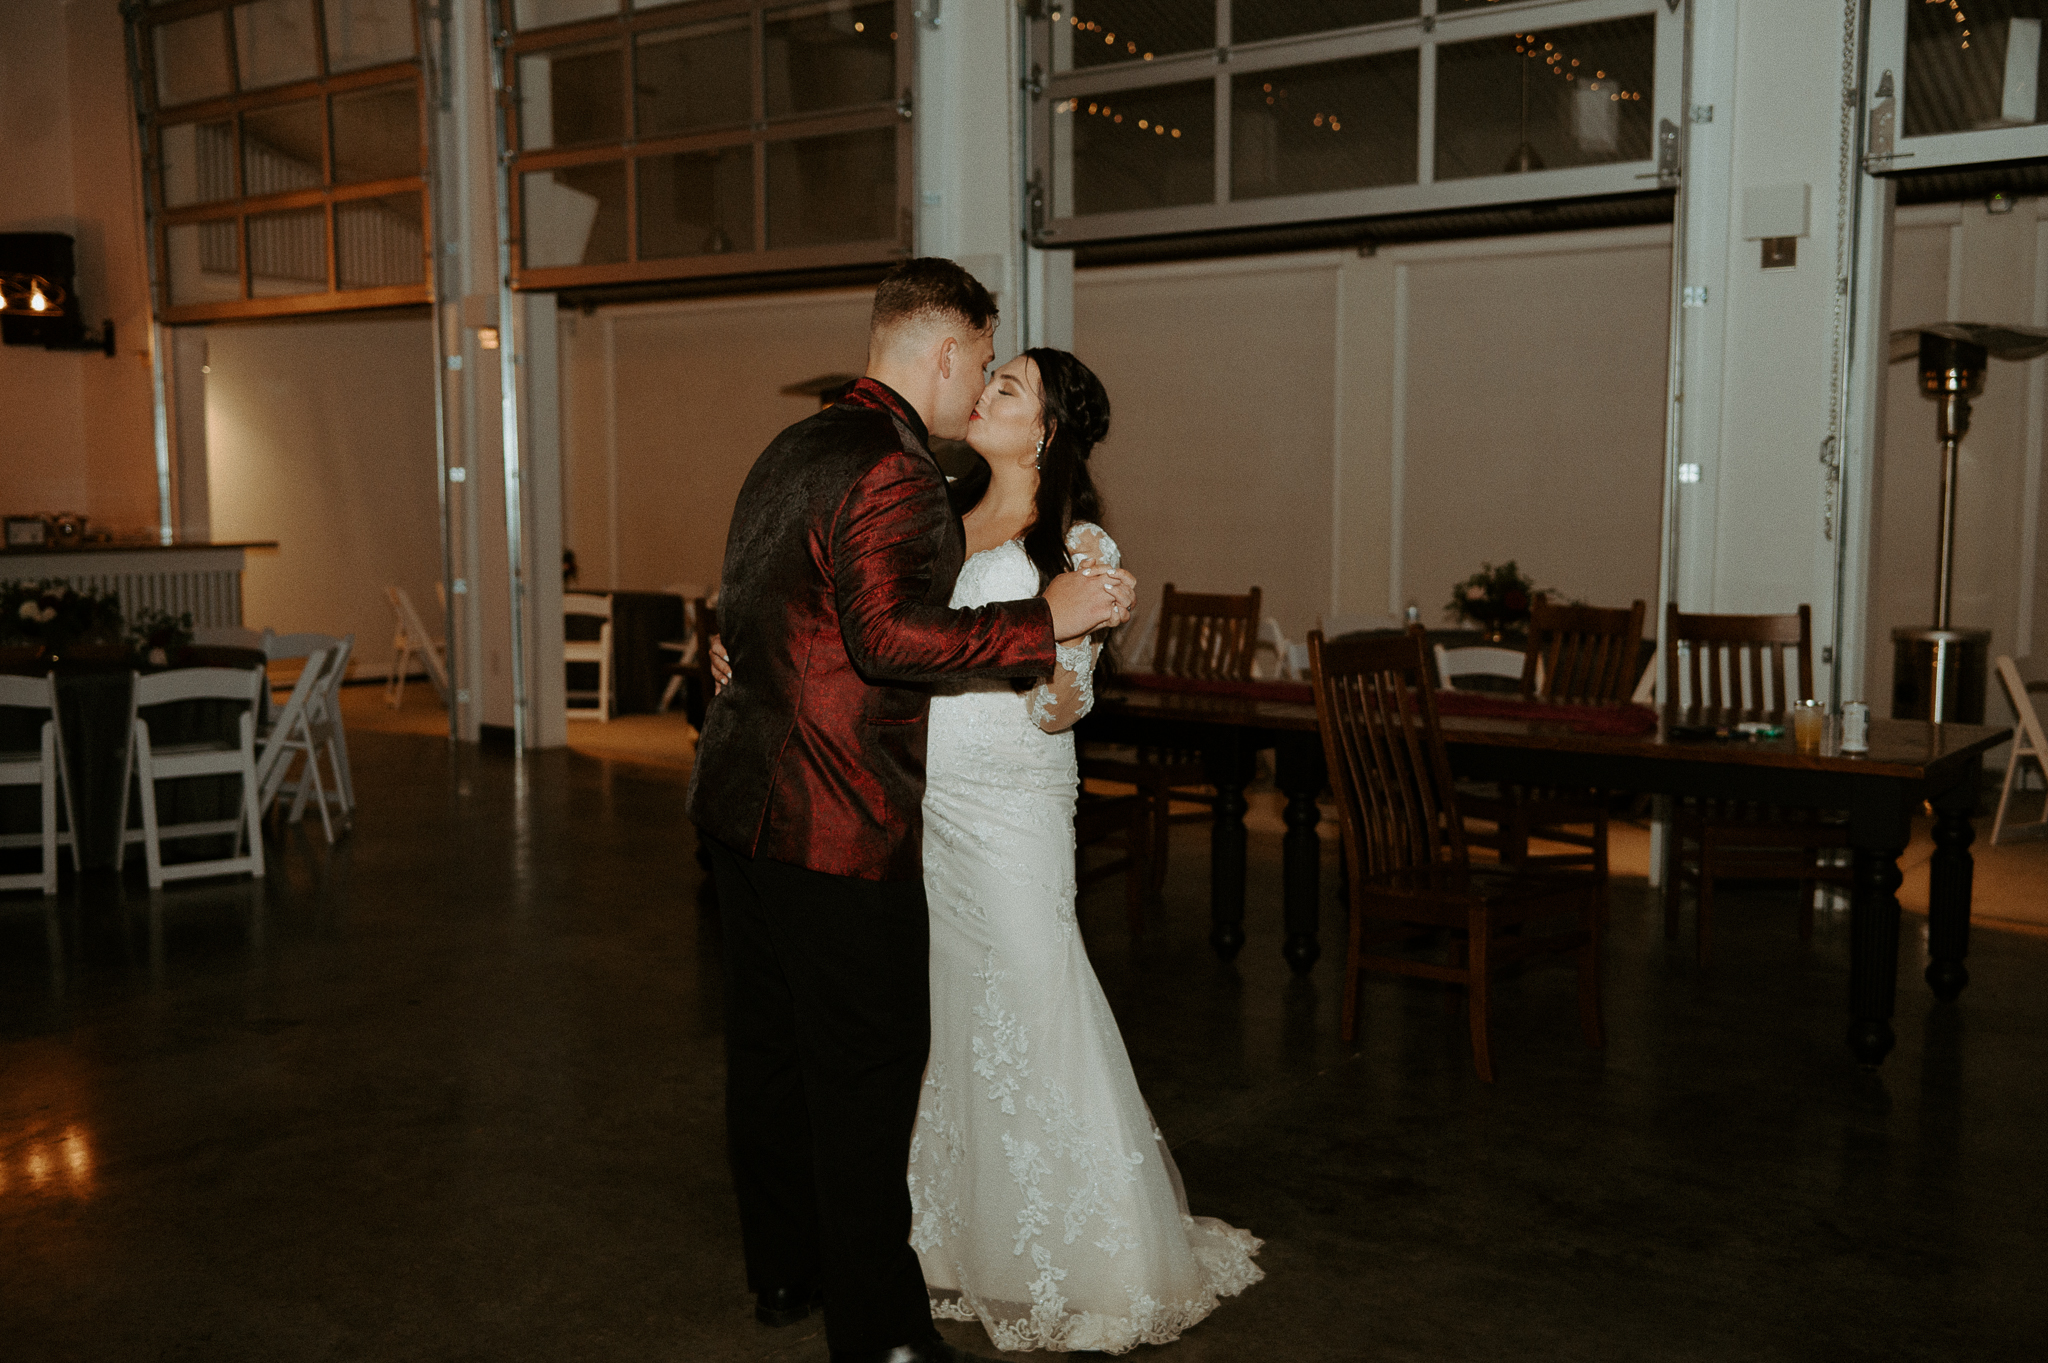 Shelby and Jacob sharing an intimate last dance during their wedding day. 